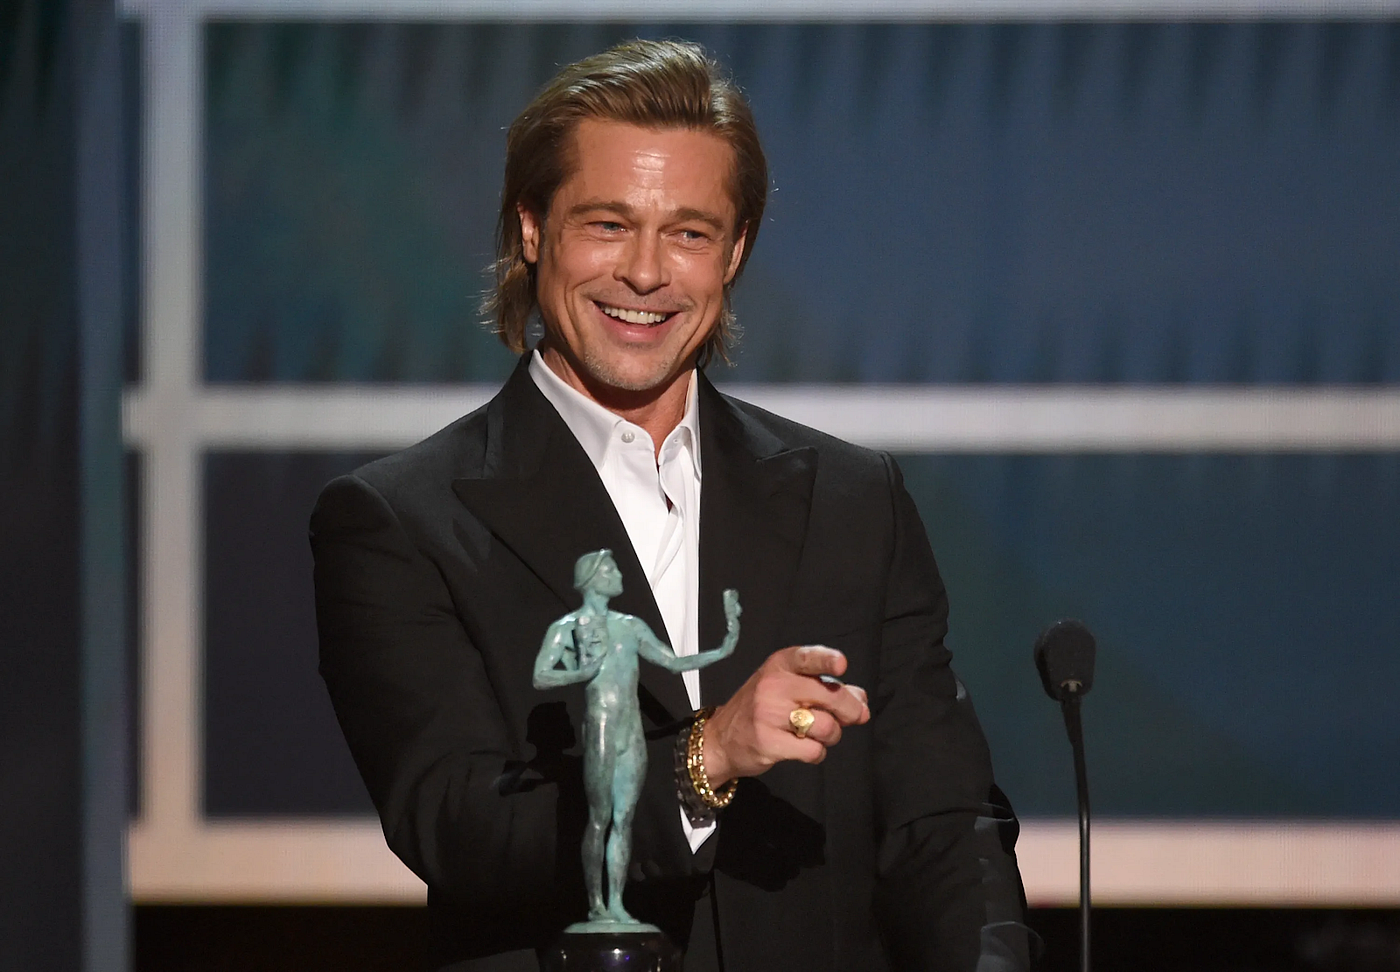 List of awards and nominations received by Brad Pitt - Wikipedia